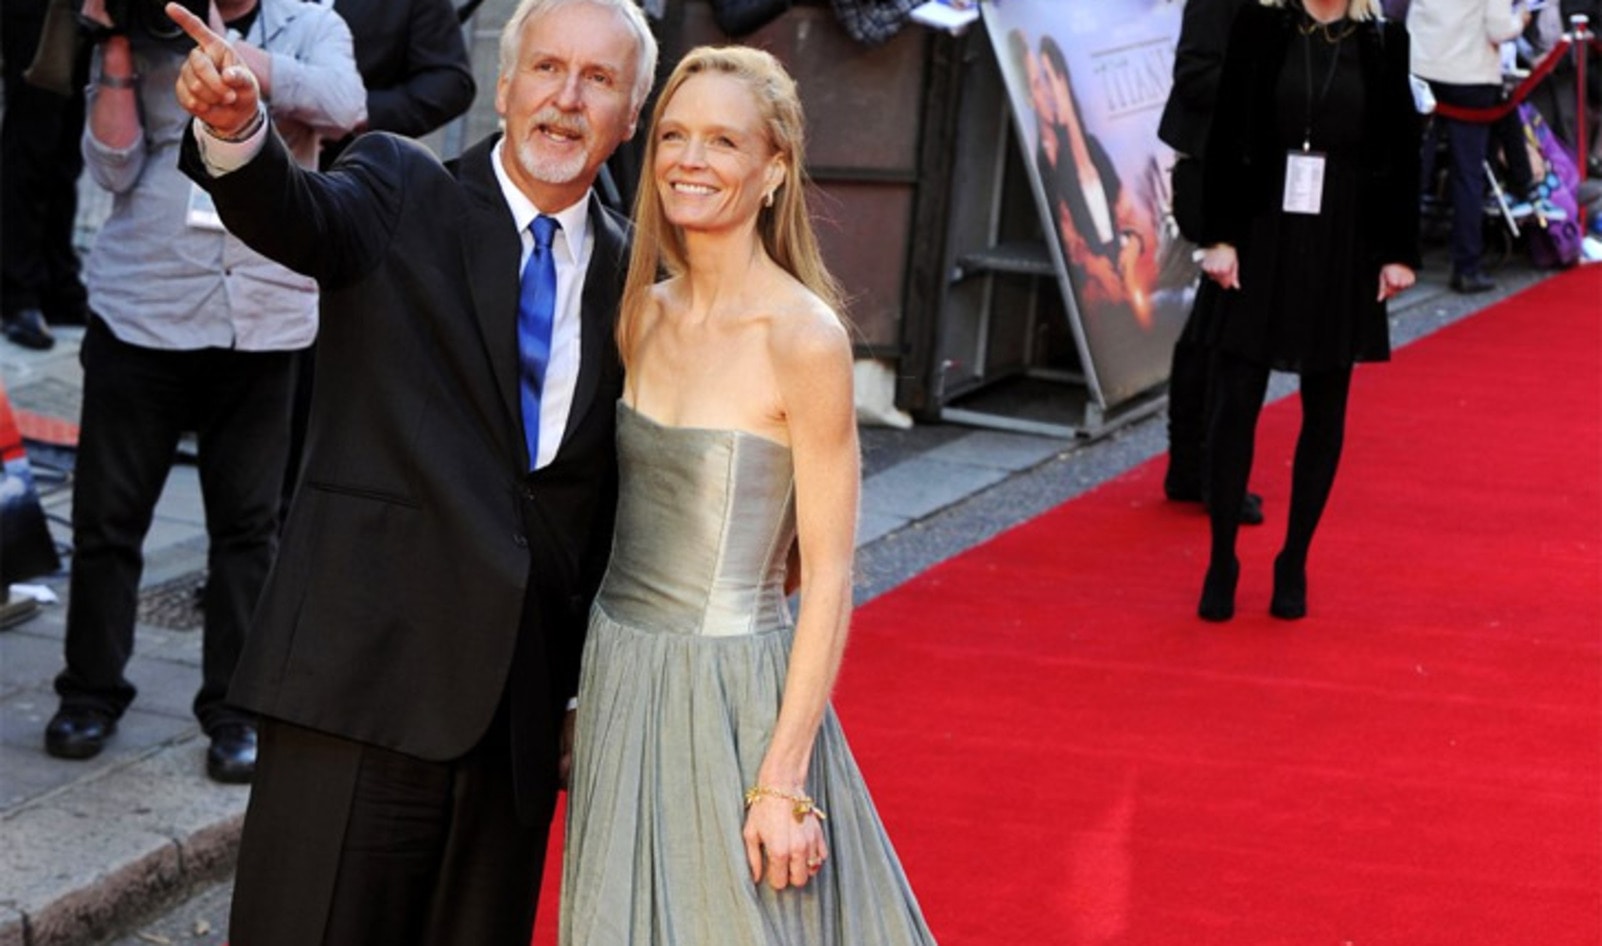 James and Suzy Amis Cameron’s All-Vegan School Plans Global Expansion